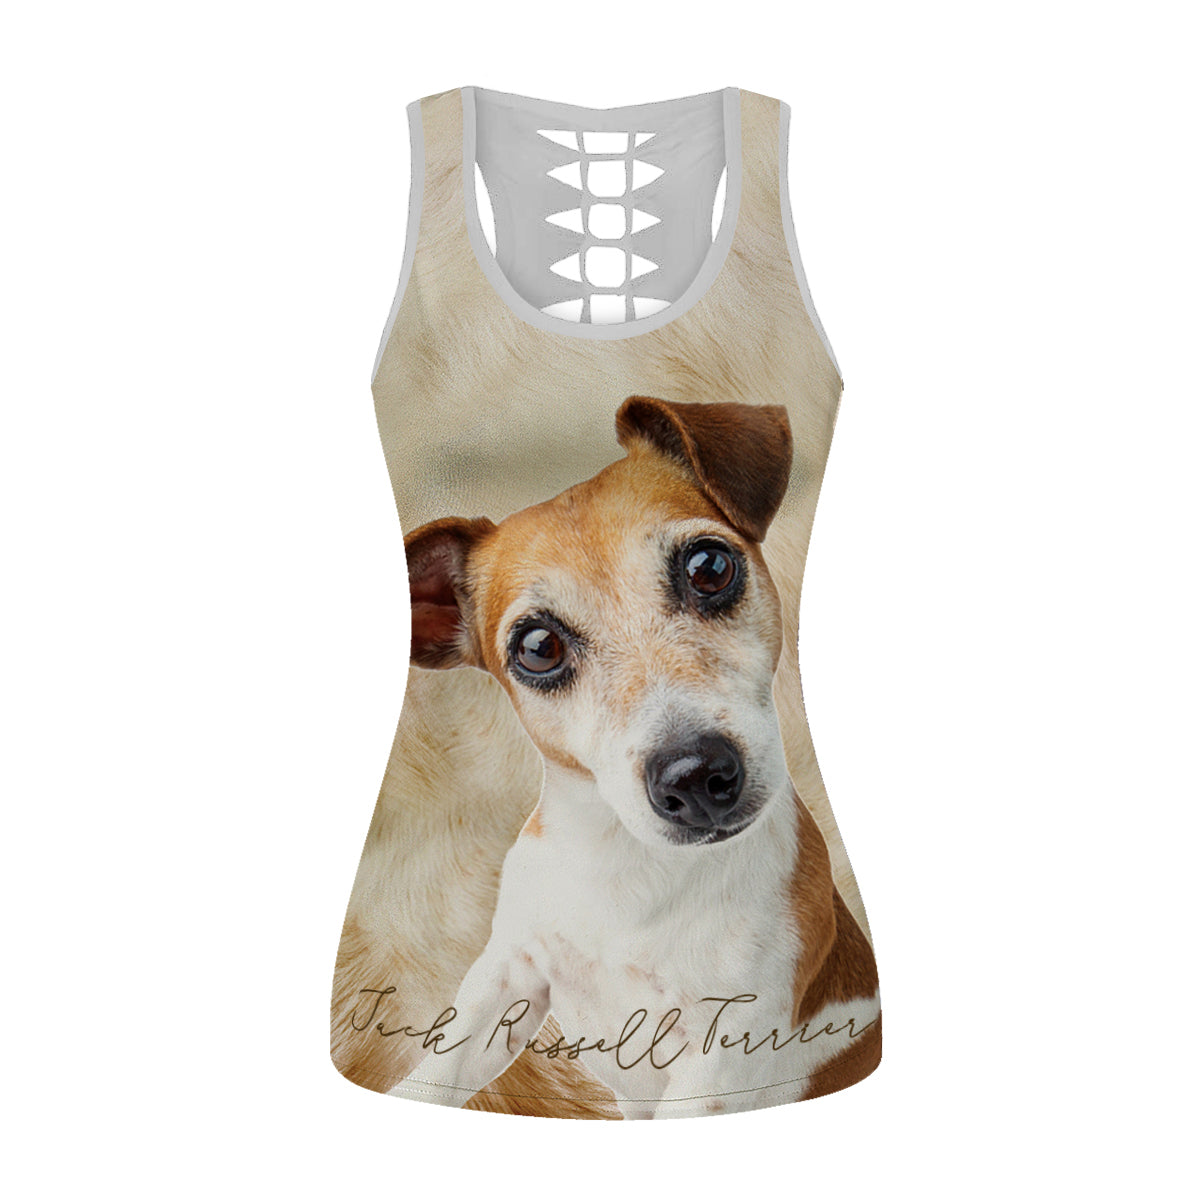 Jack Russell Terrier - Hollow Tank Top V1